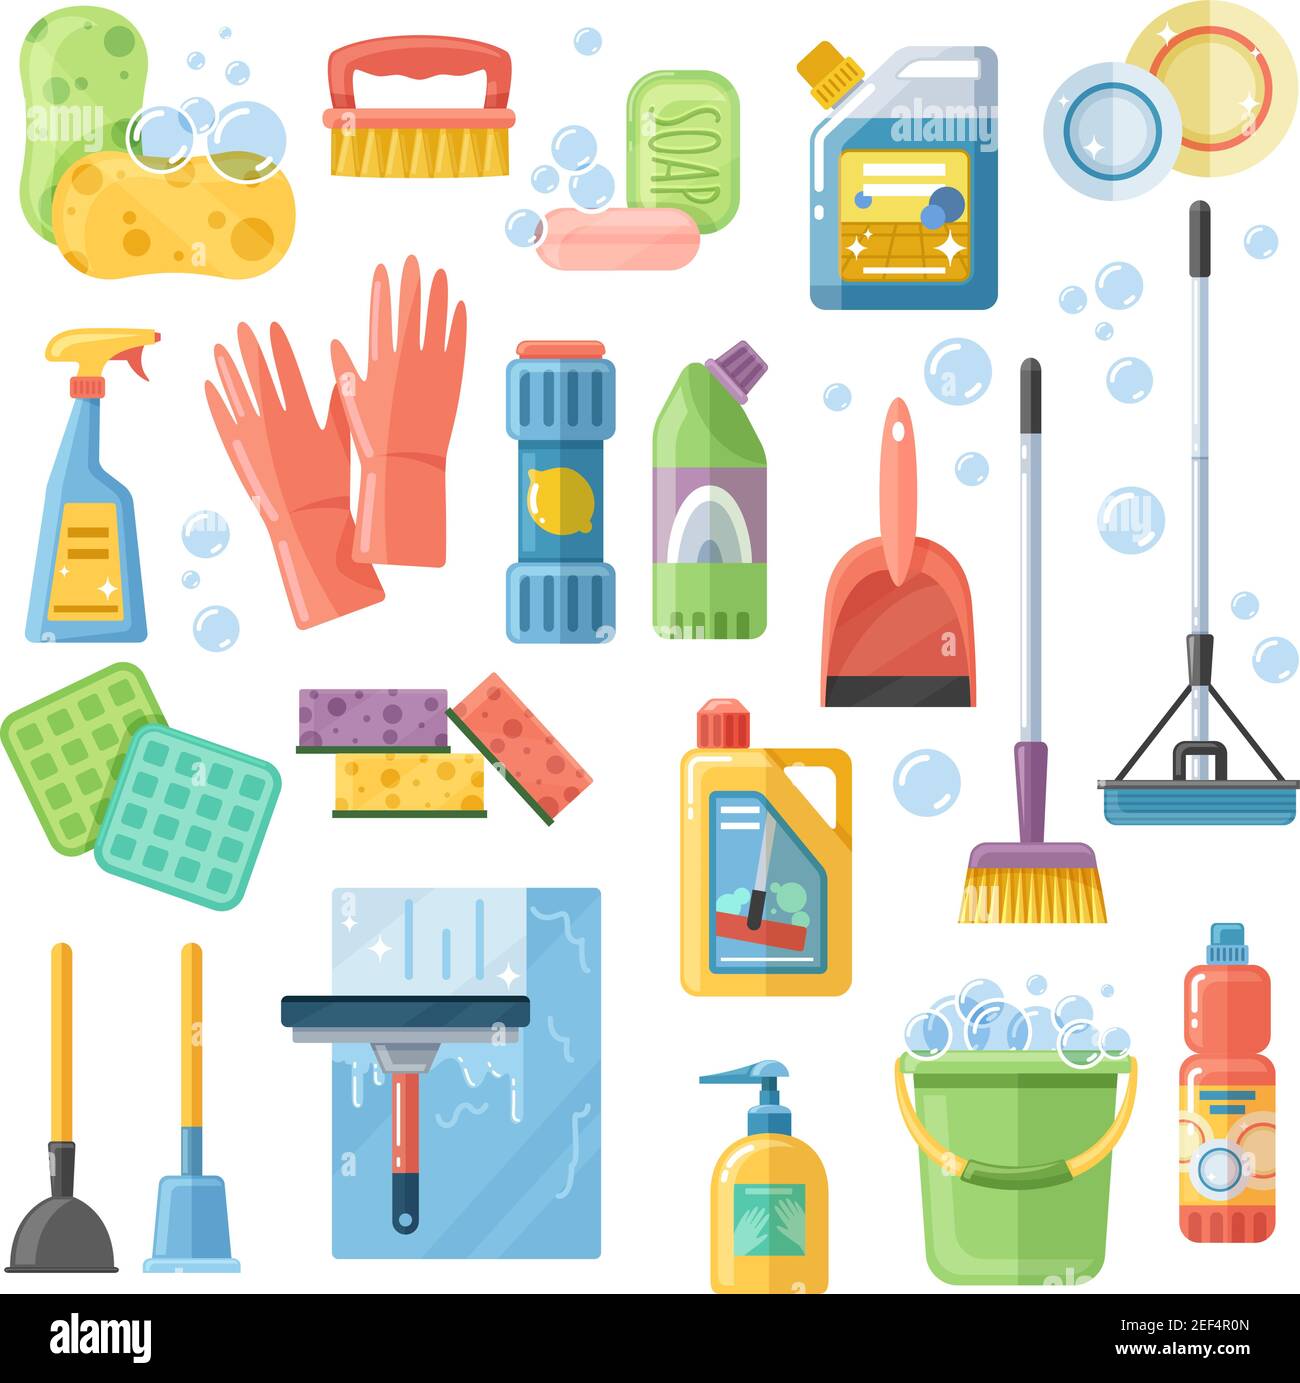 https://c8.alamy.com/comp/2EF4R0N/selection-of-cleaning-supplies-tools-accessories-flat-icons-set-with-rubber-gloves-sponge-brushes-detergents-vector-illustration-2EF4R0N.jpg